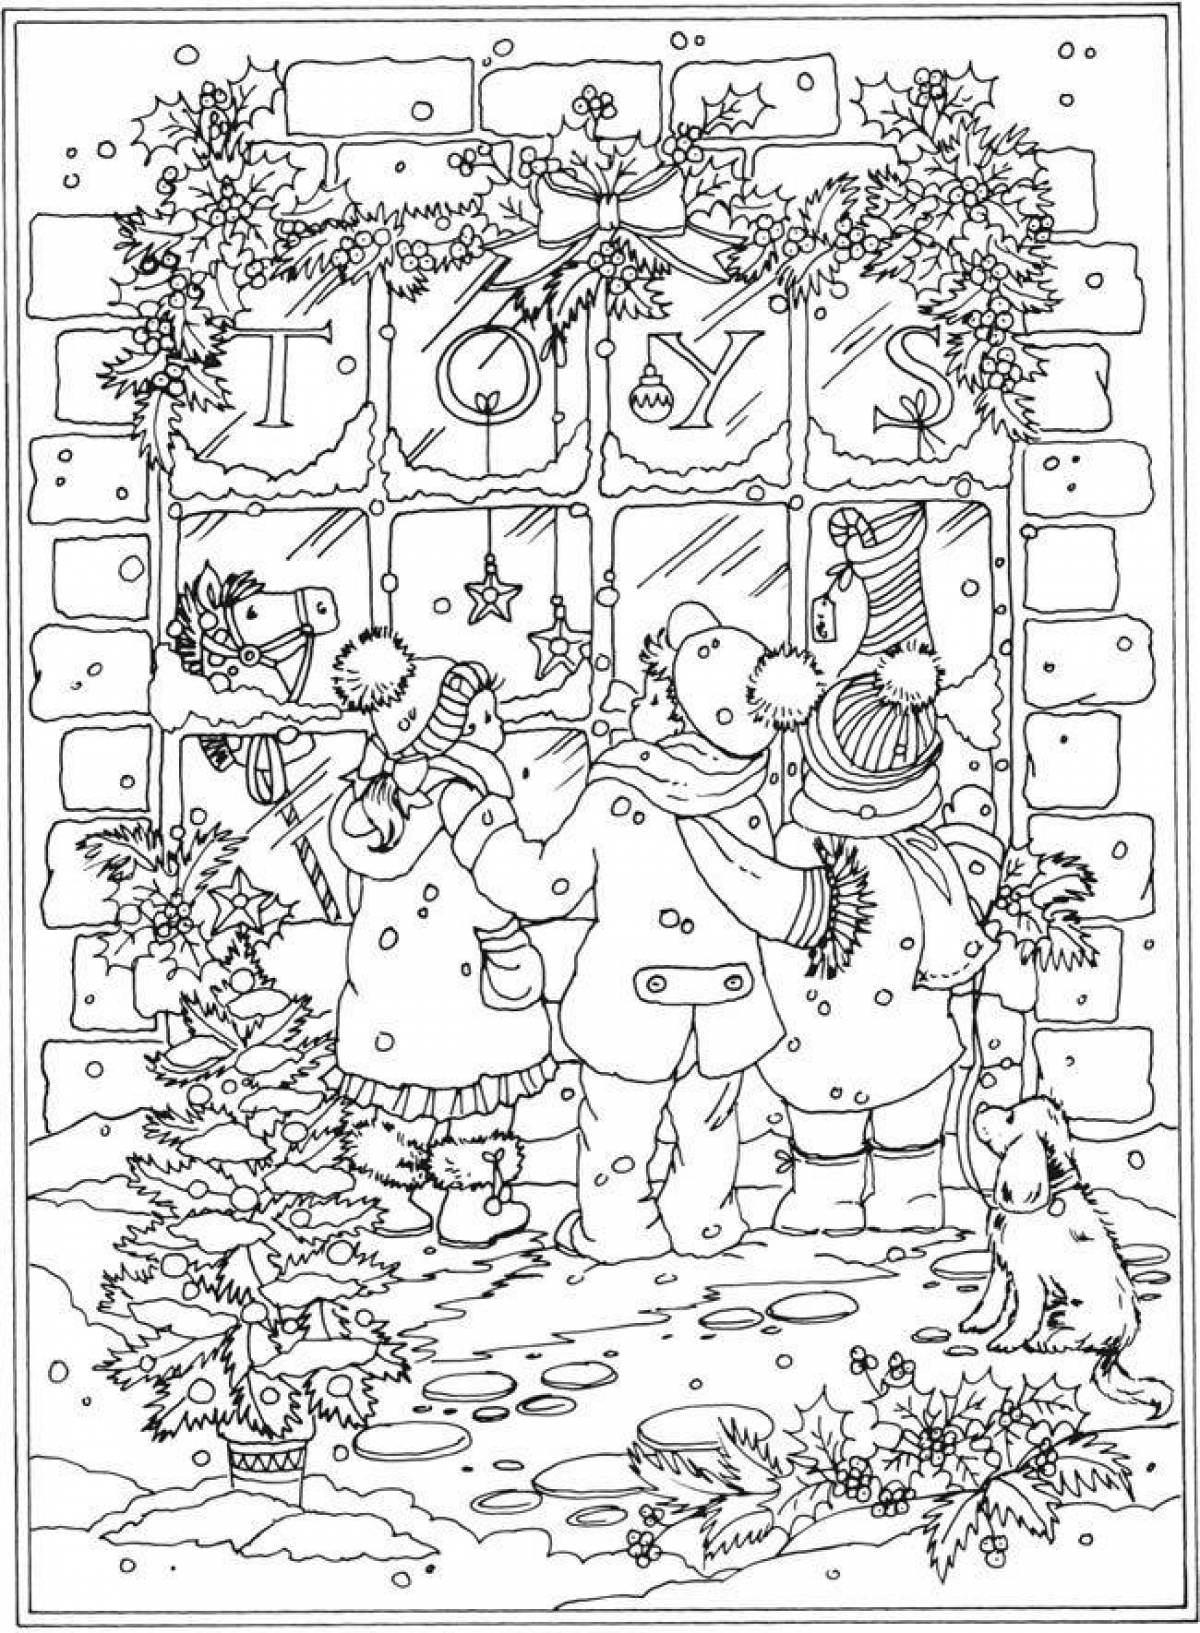 Fantastic Christmas coloring book for adults